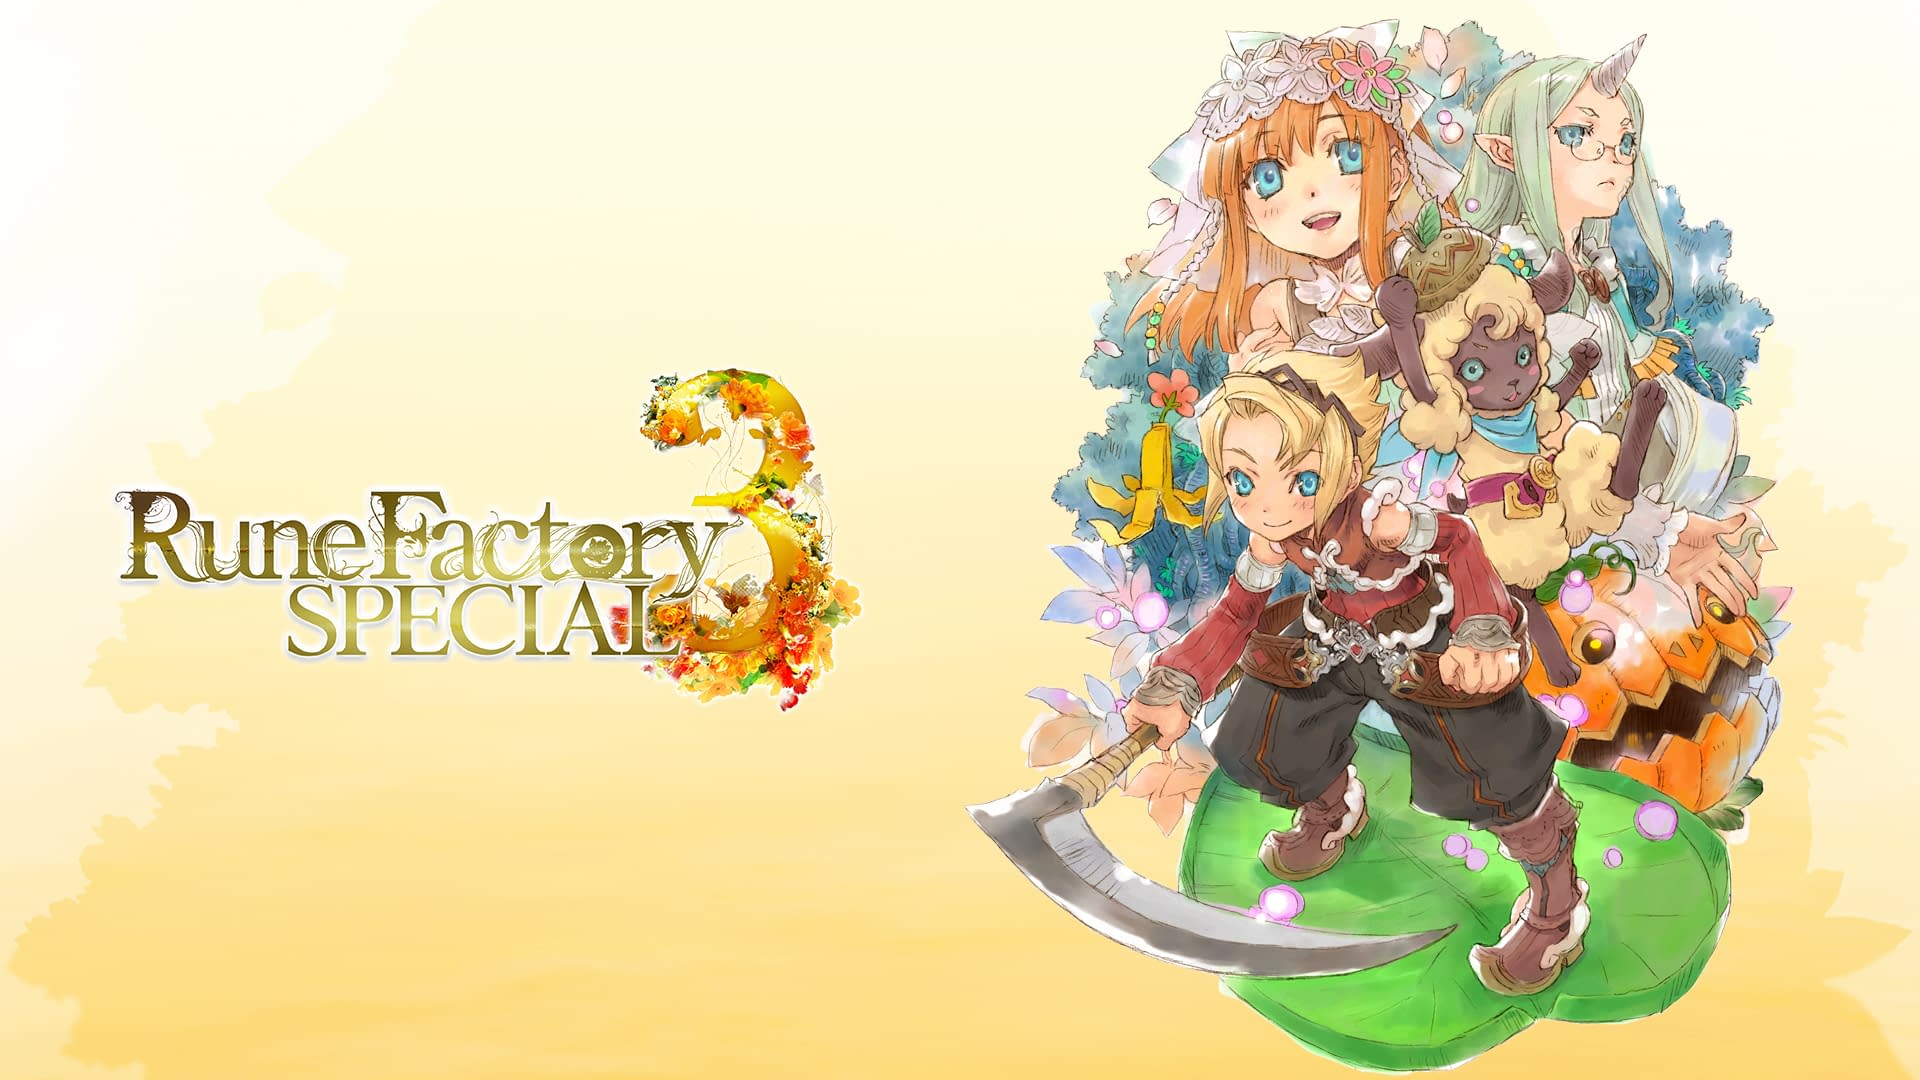 rune-factory-3-special-reveals-the-bachelorettes-in-latest-trailer